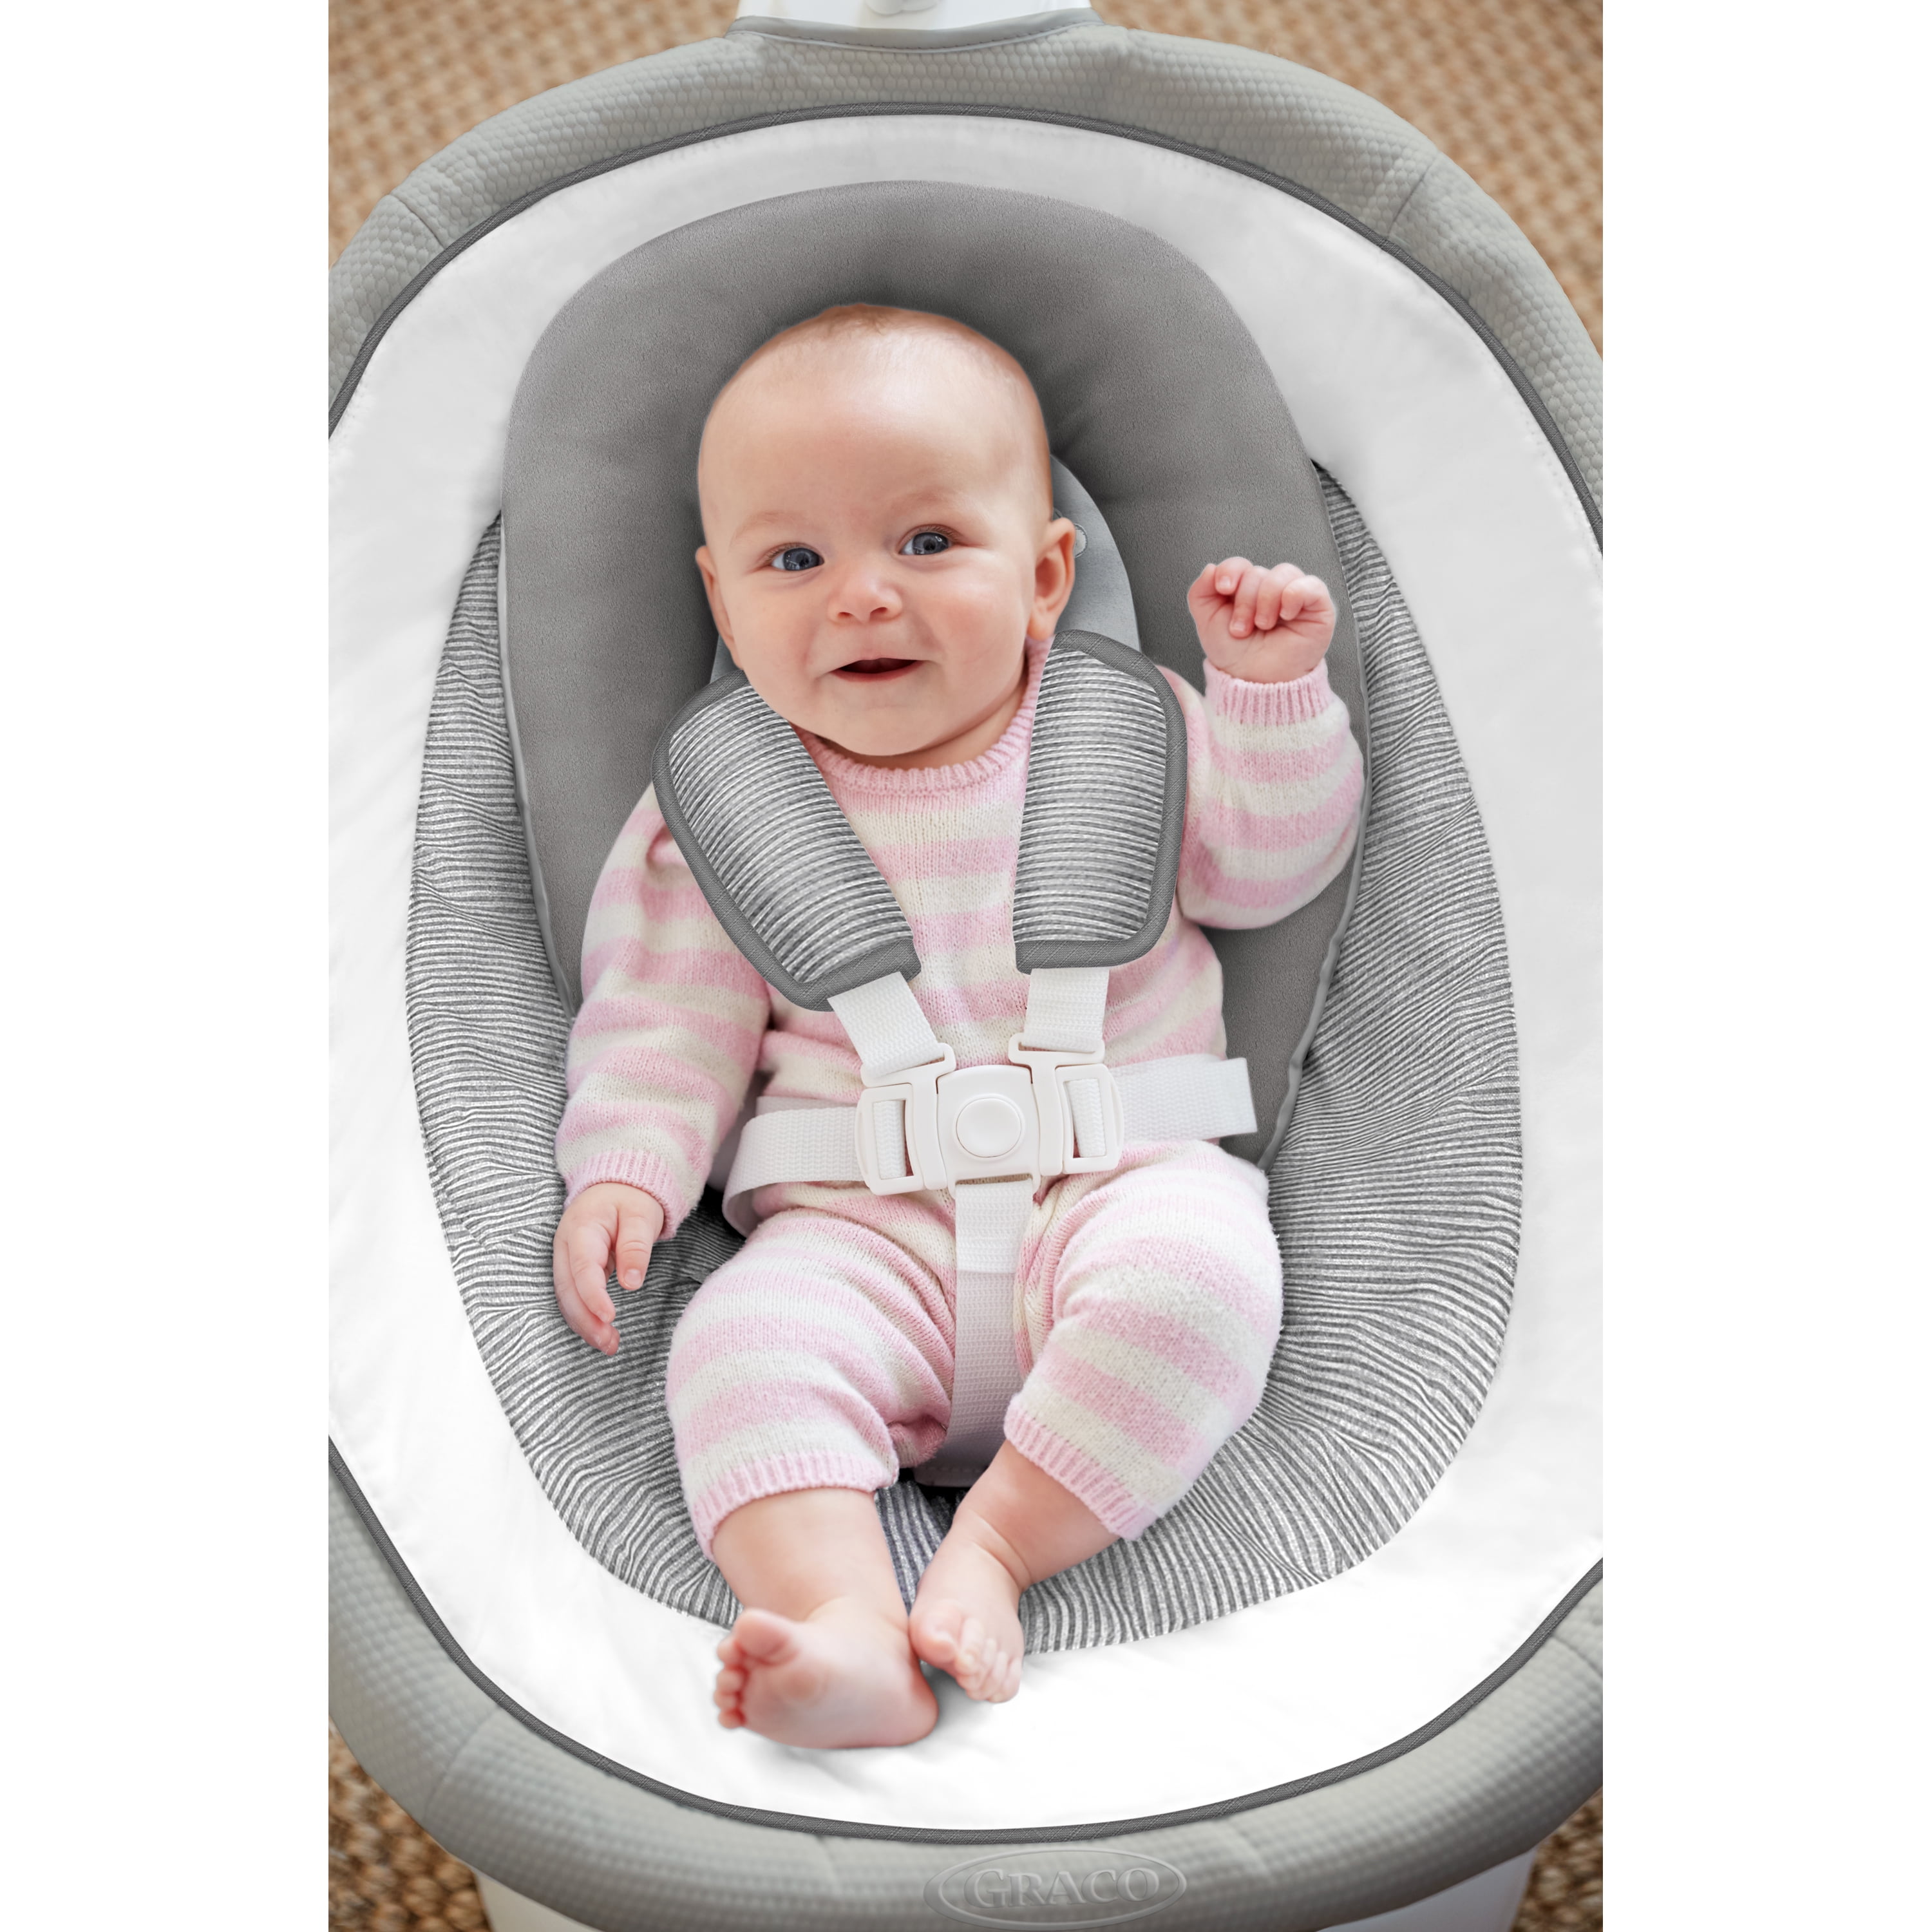 graco sense2soothe baby swing with cry detection technology in sailor